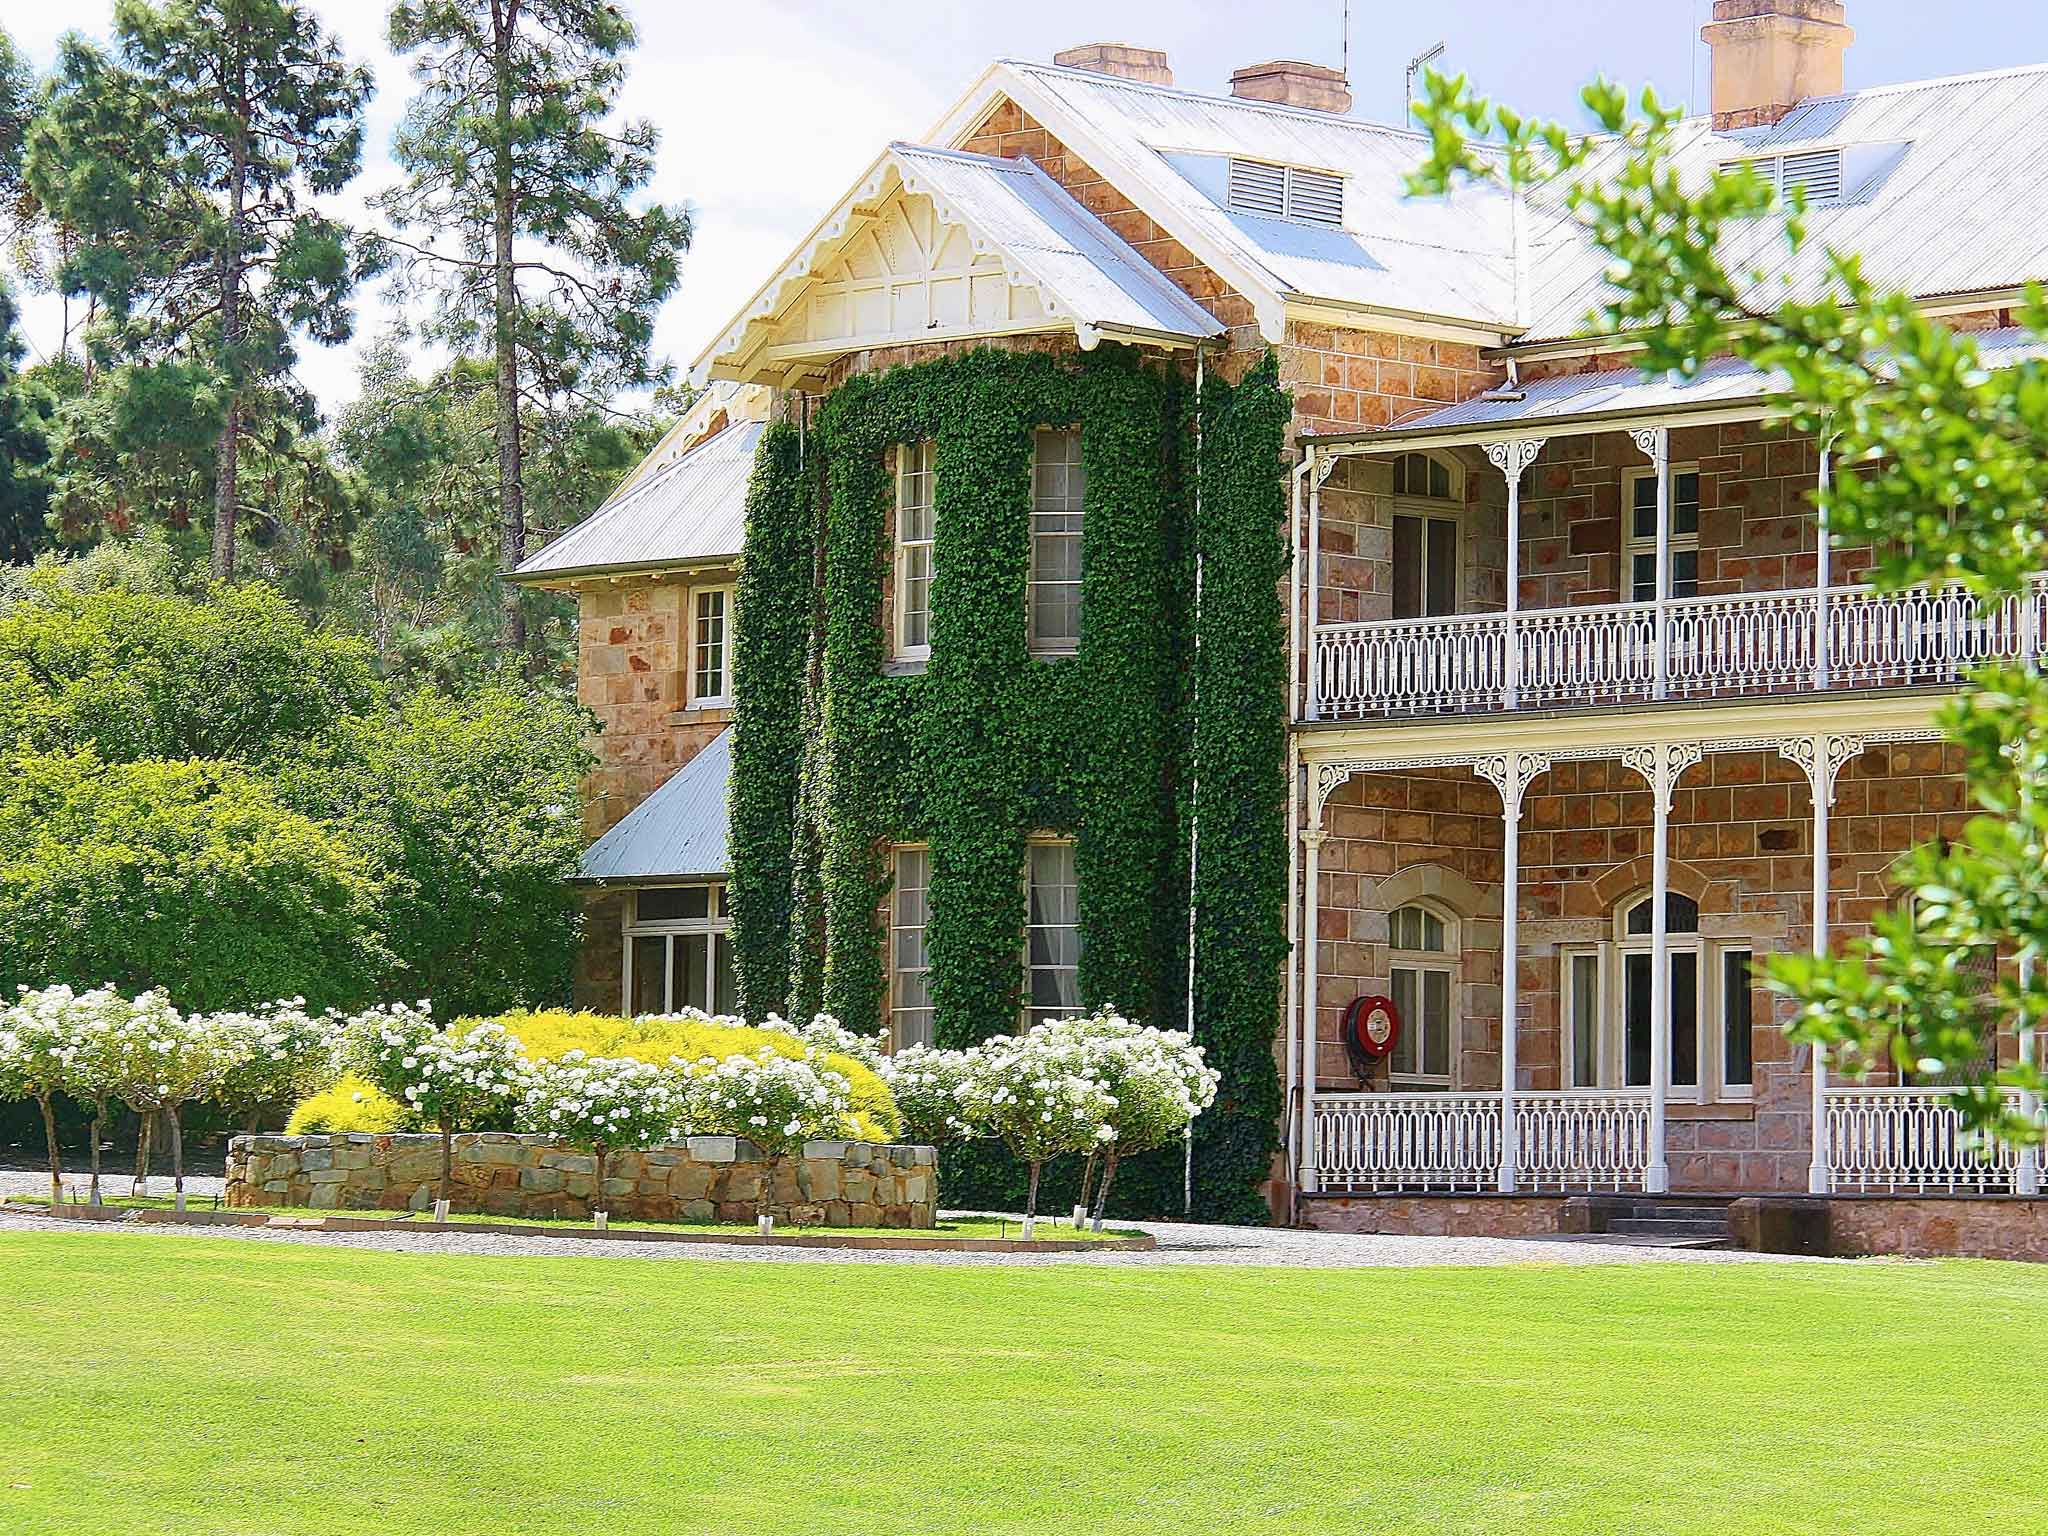 Bungaree Homestead remains our family's home